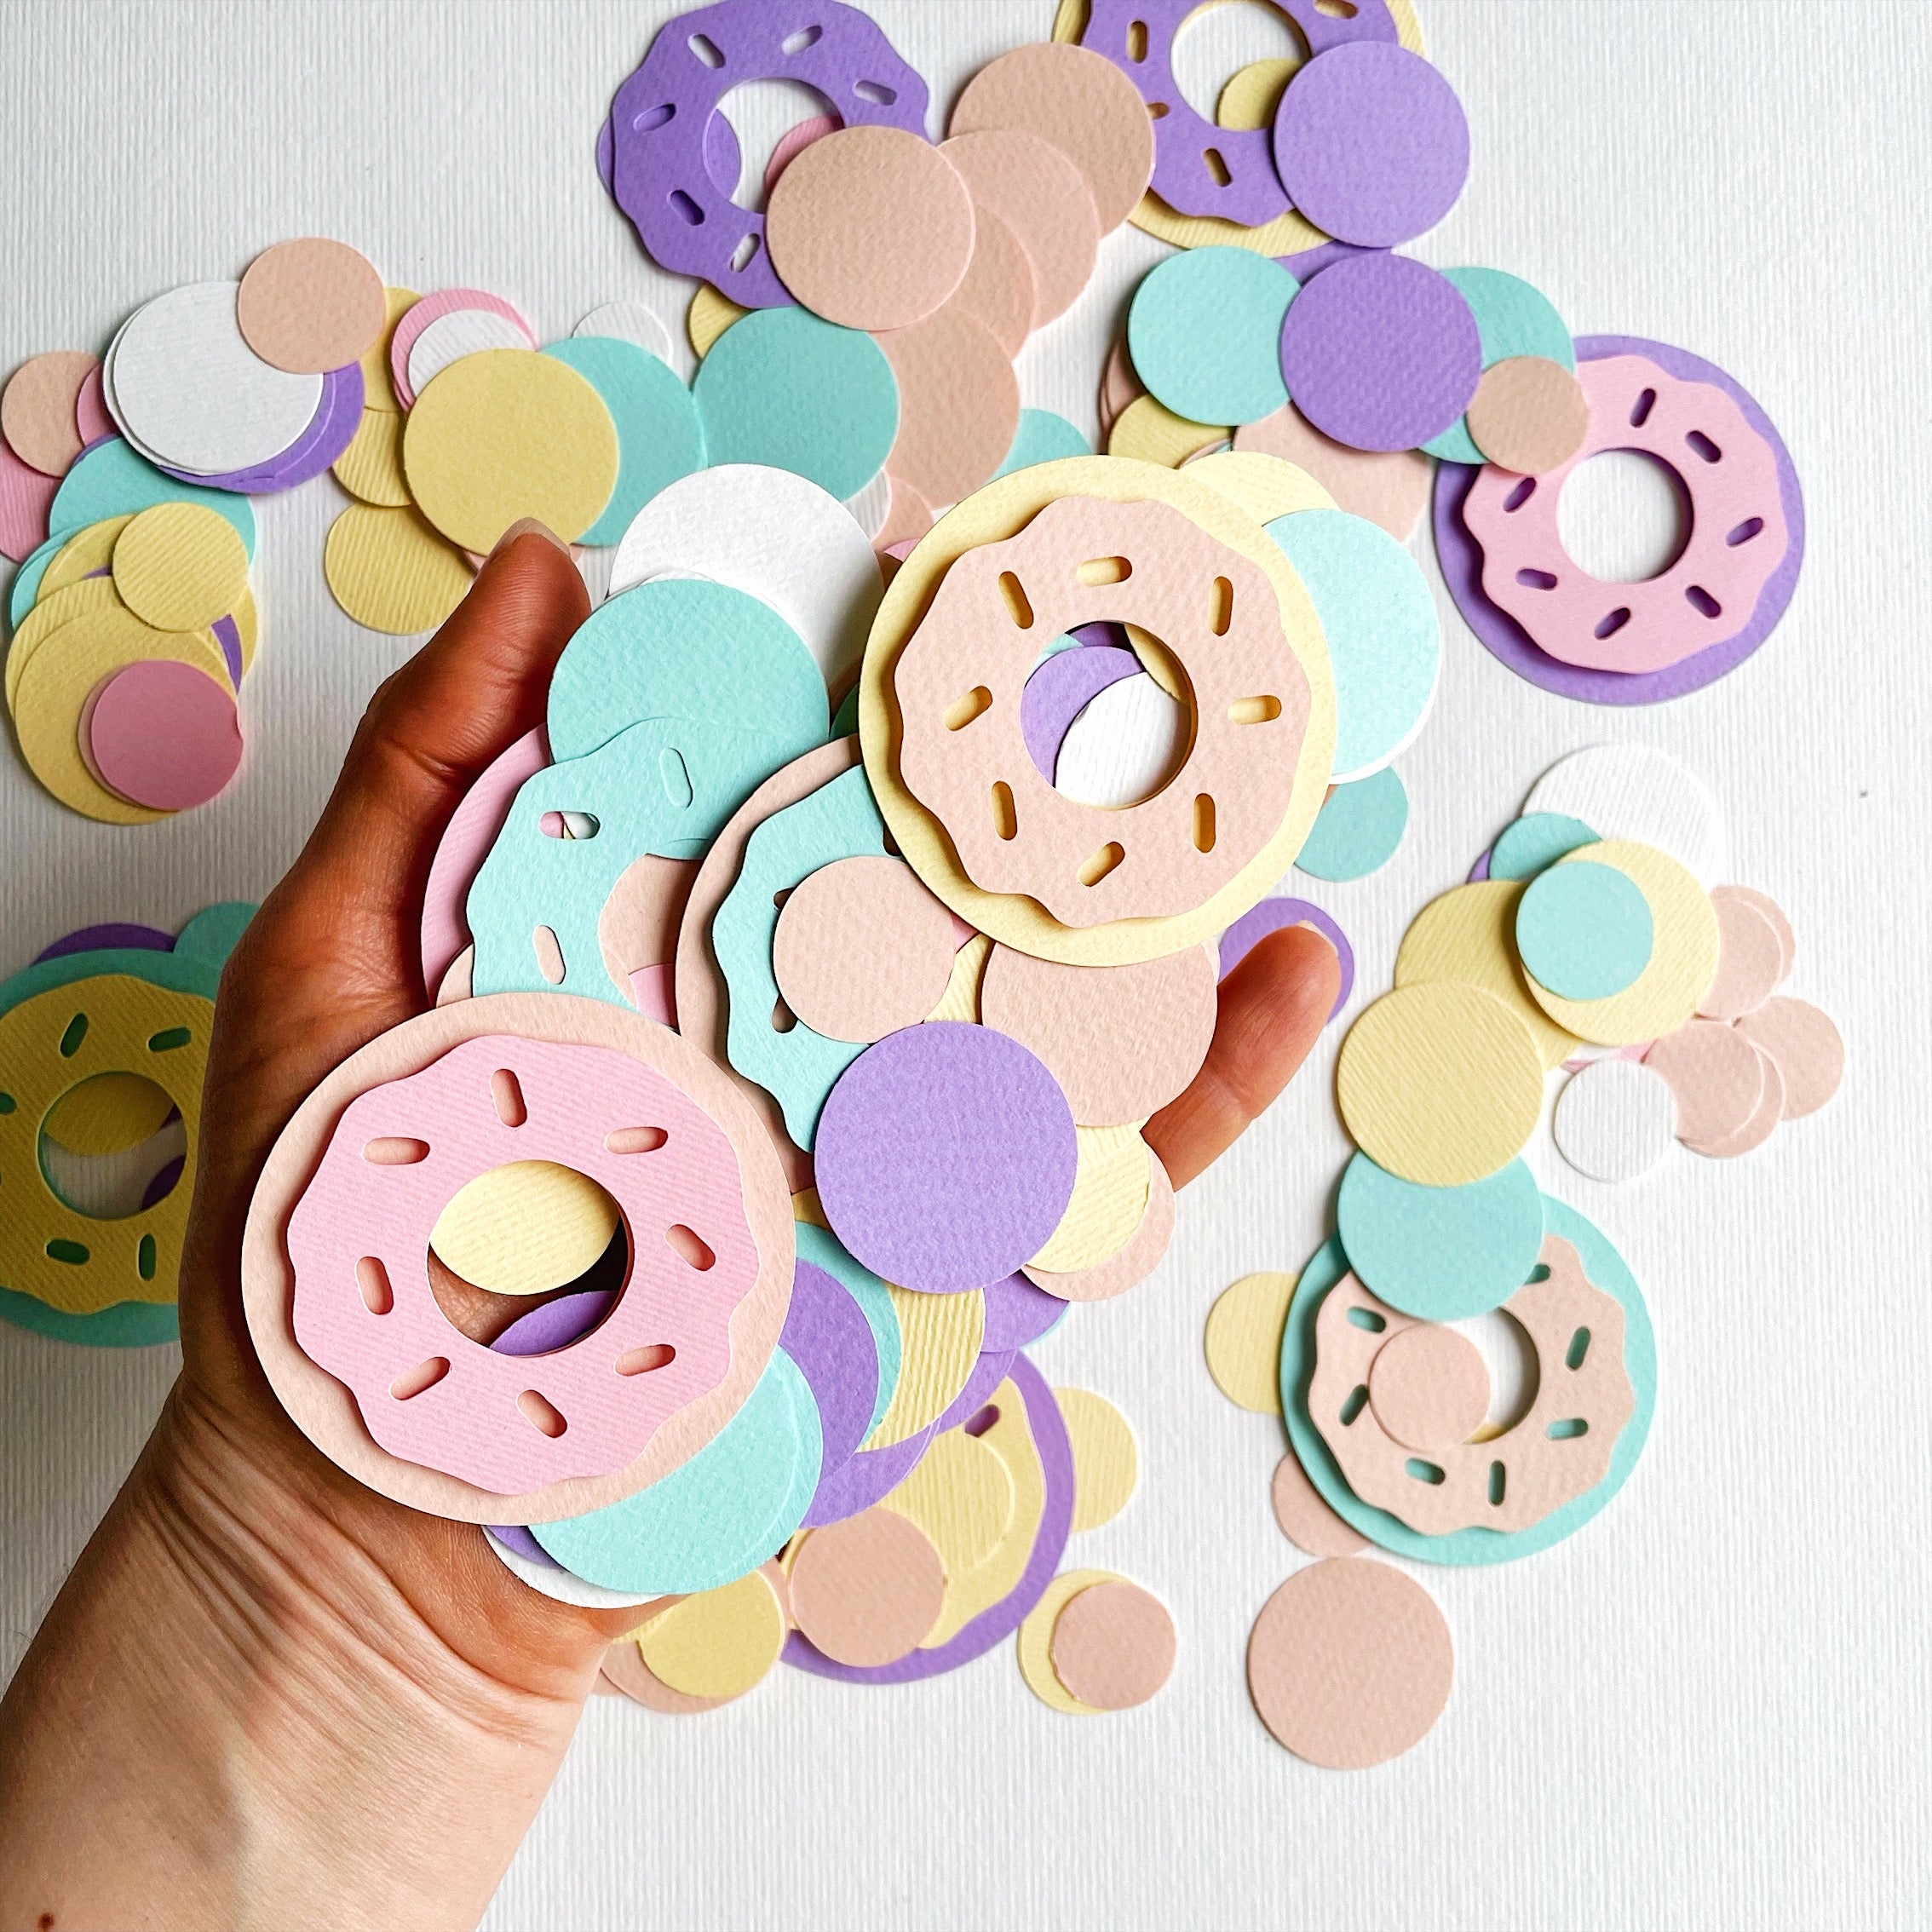 Donuts Confetti Two Sweet Birthday Donuts Baby Shower Decorations Sweet Celebration